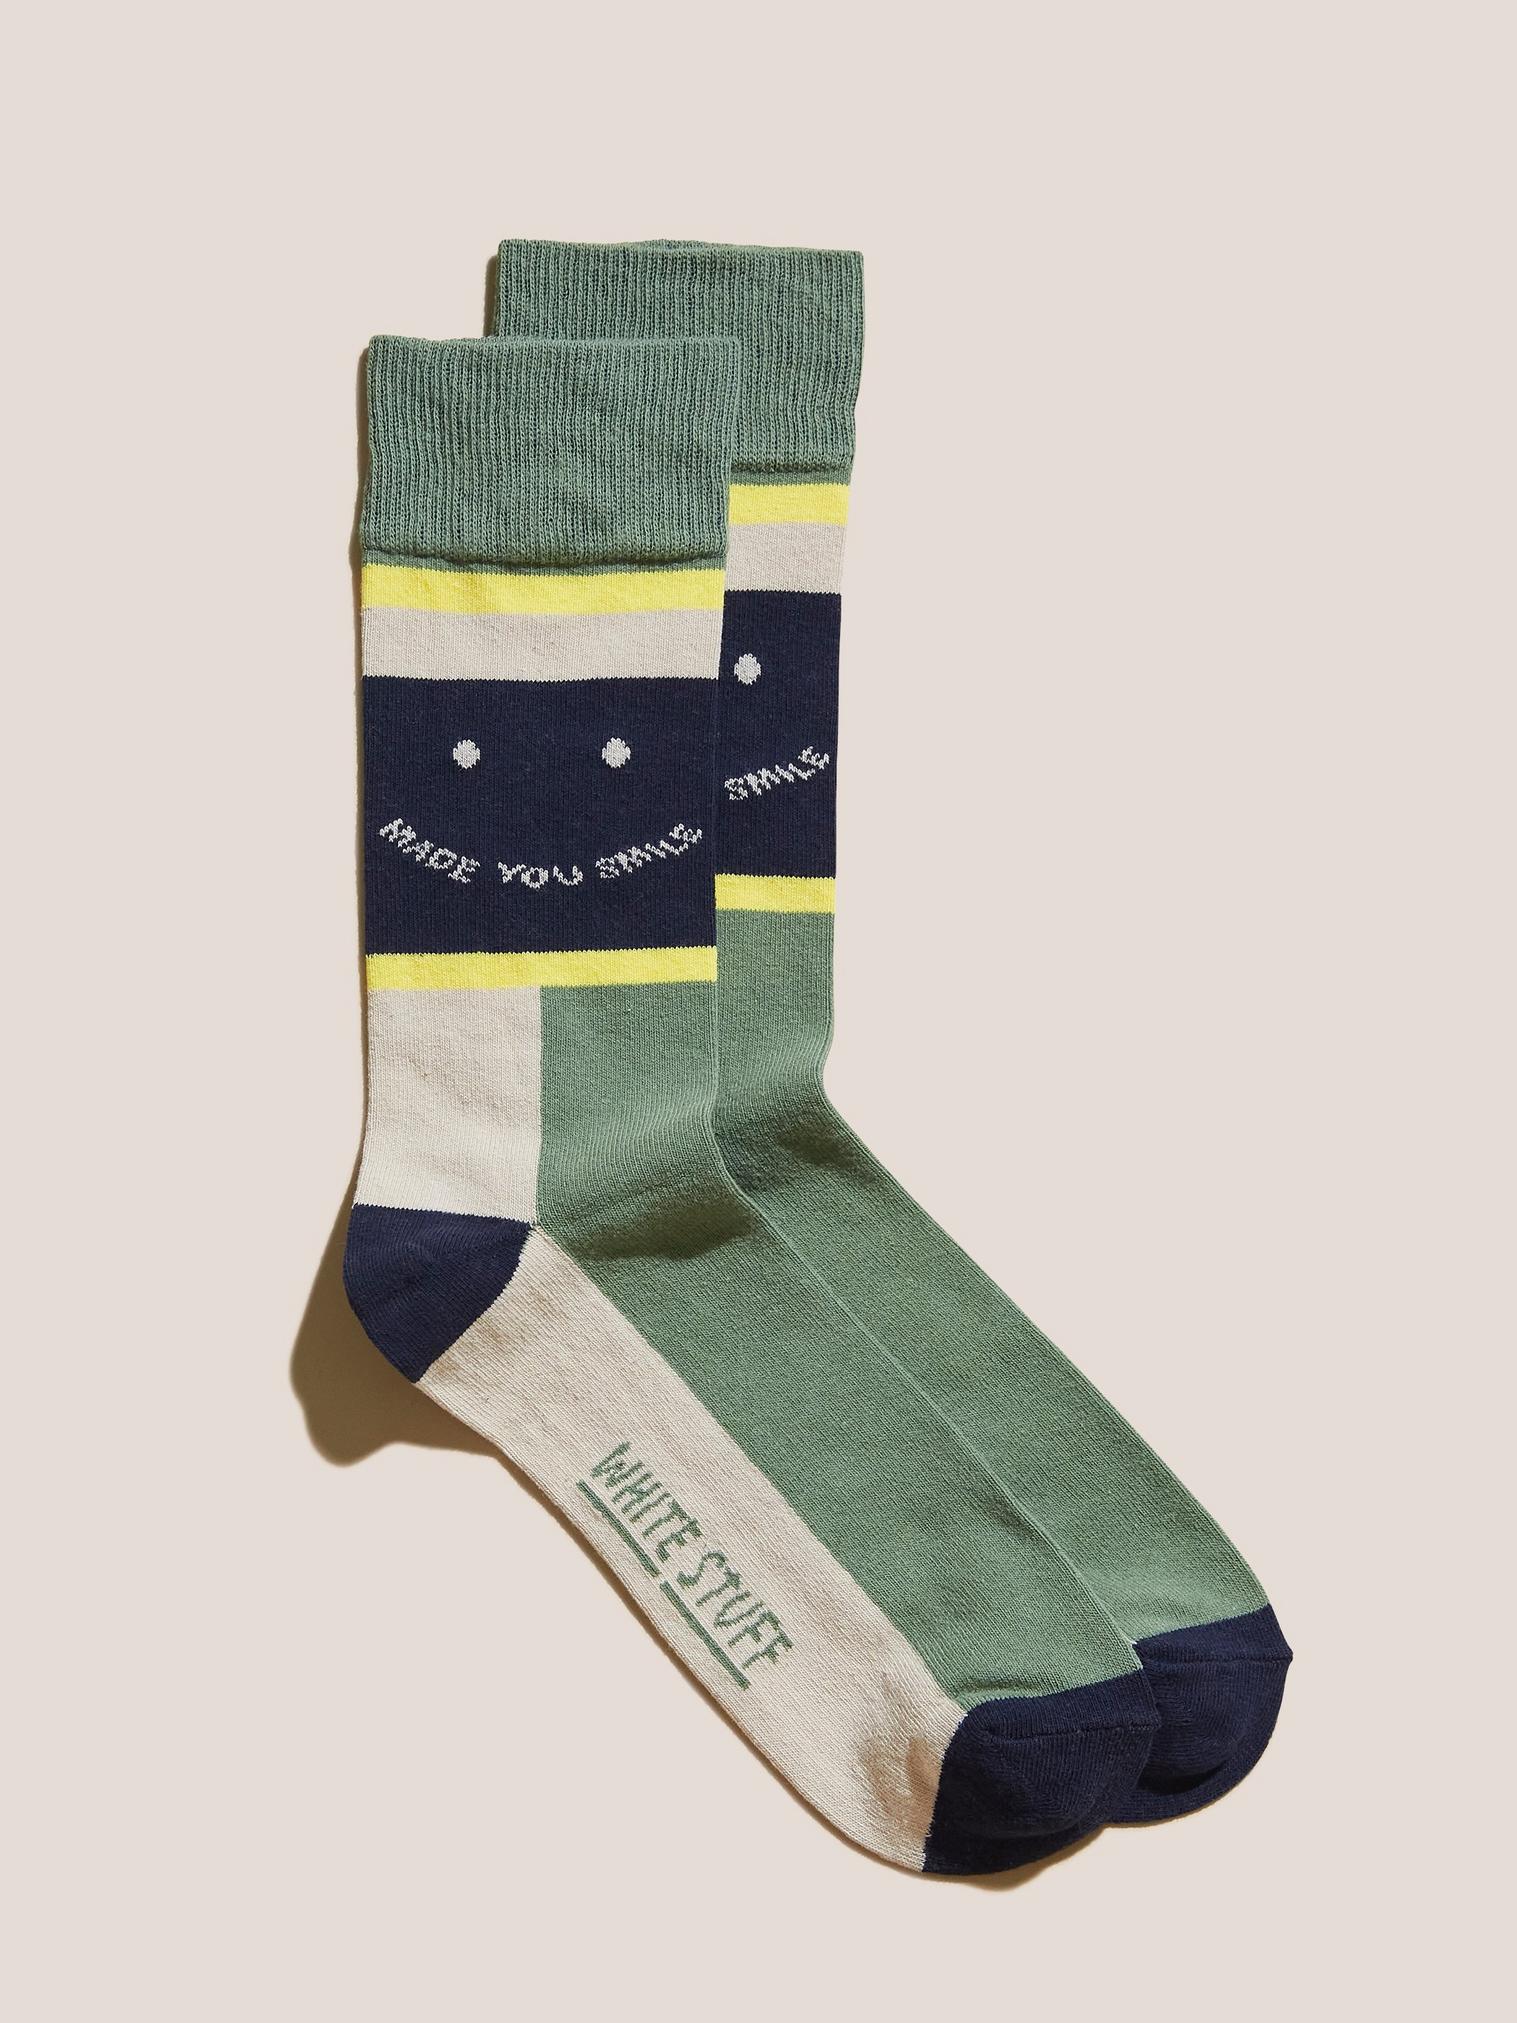 Made You Smile Socks in GREEN MLT - FLAT FRONT